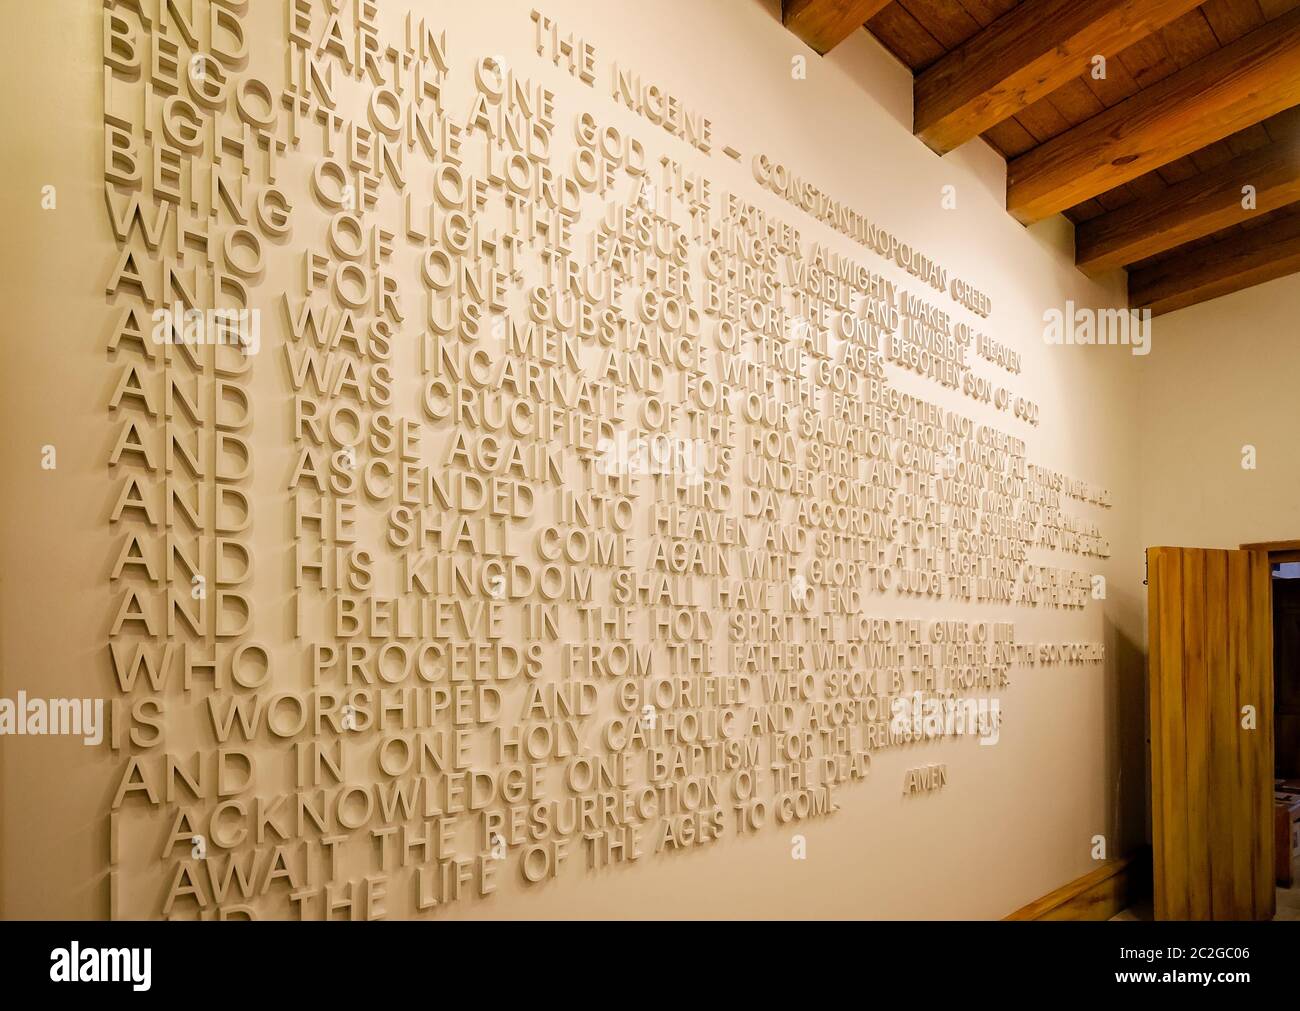 The Nicene Creed, also called the Nicaeno-Constantinopolitan Creed, is inscribed on the wall at St. Photios National Shrine in St. Augustine, Florida. Stock Photo